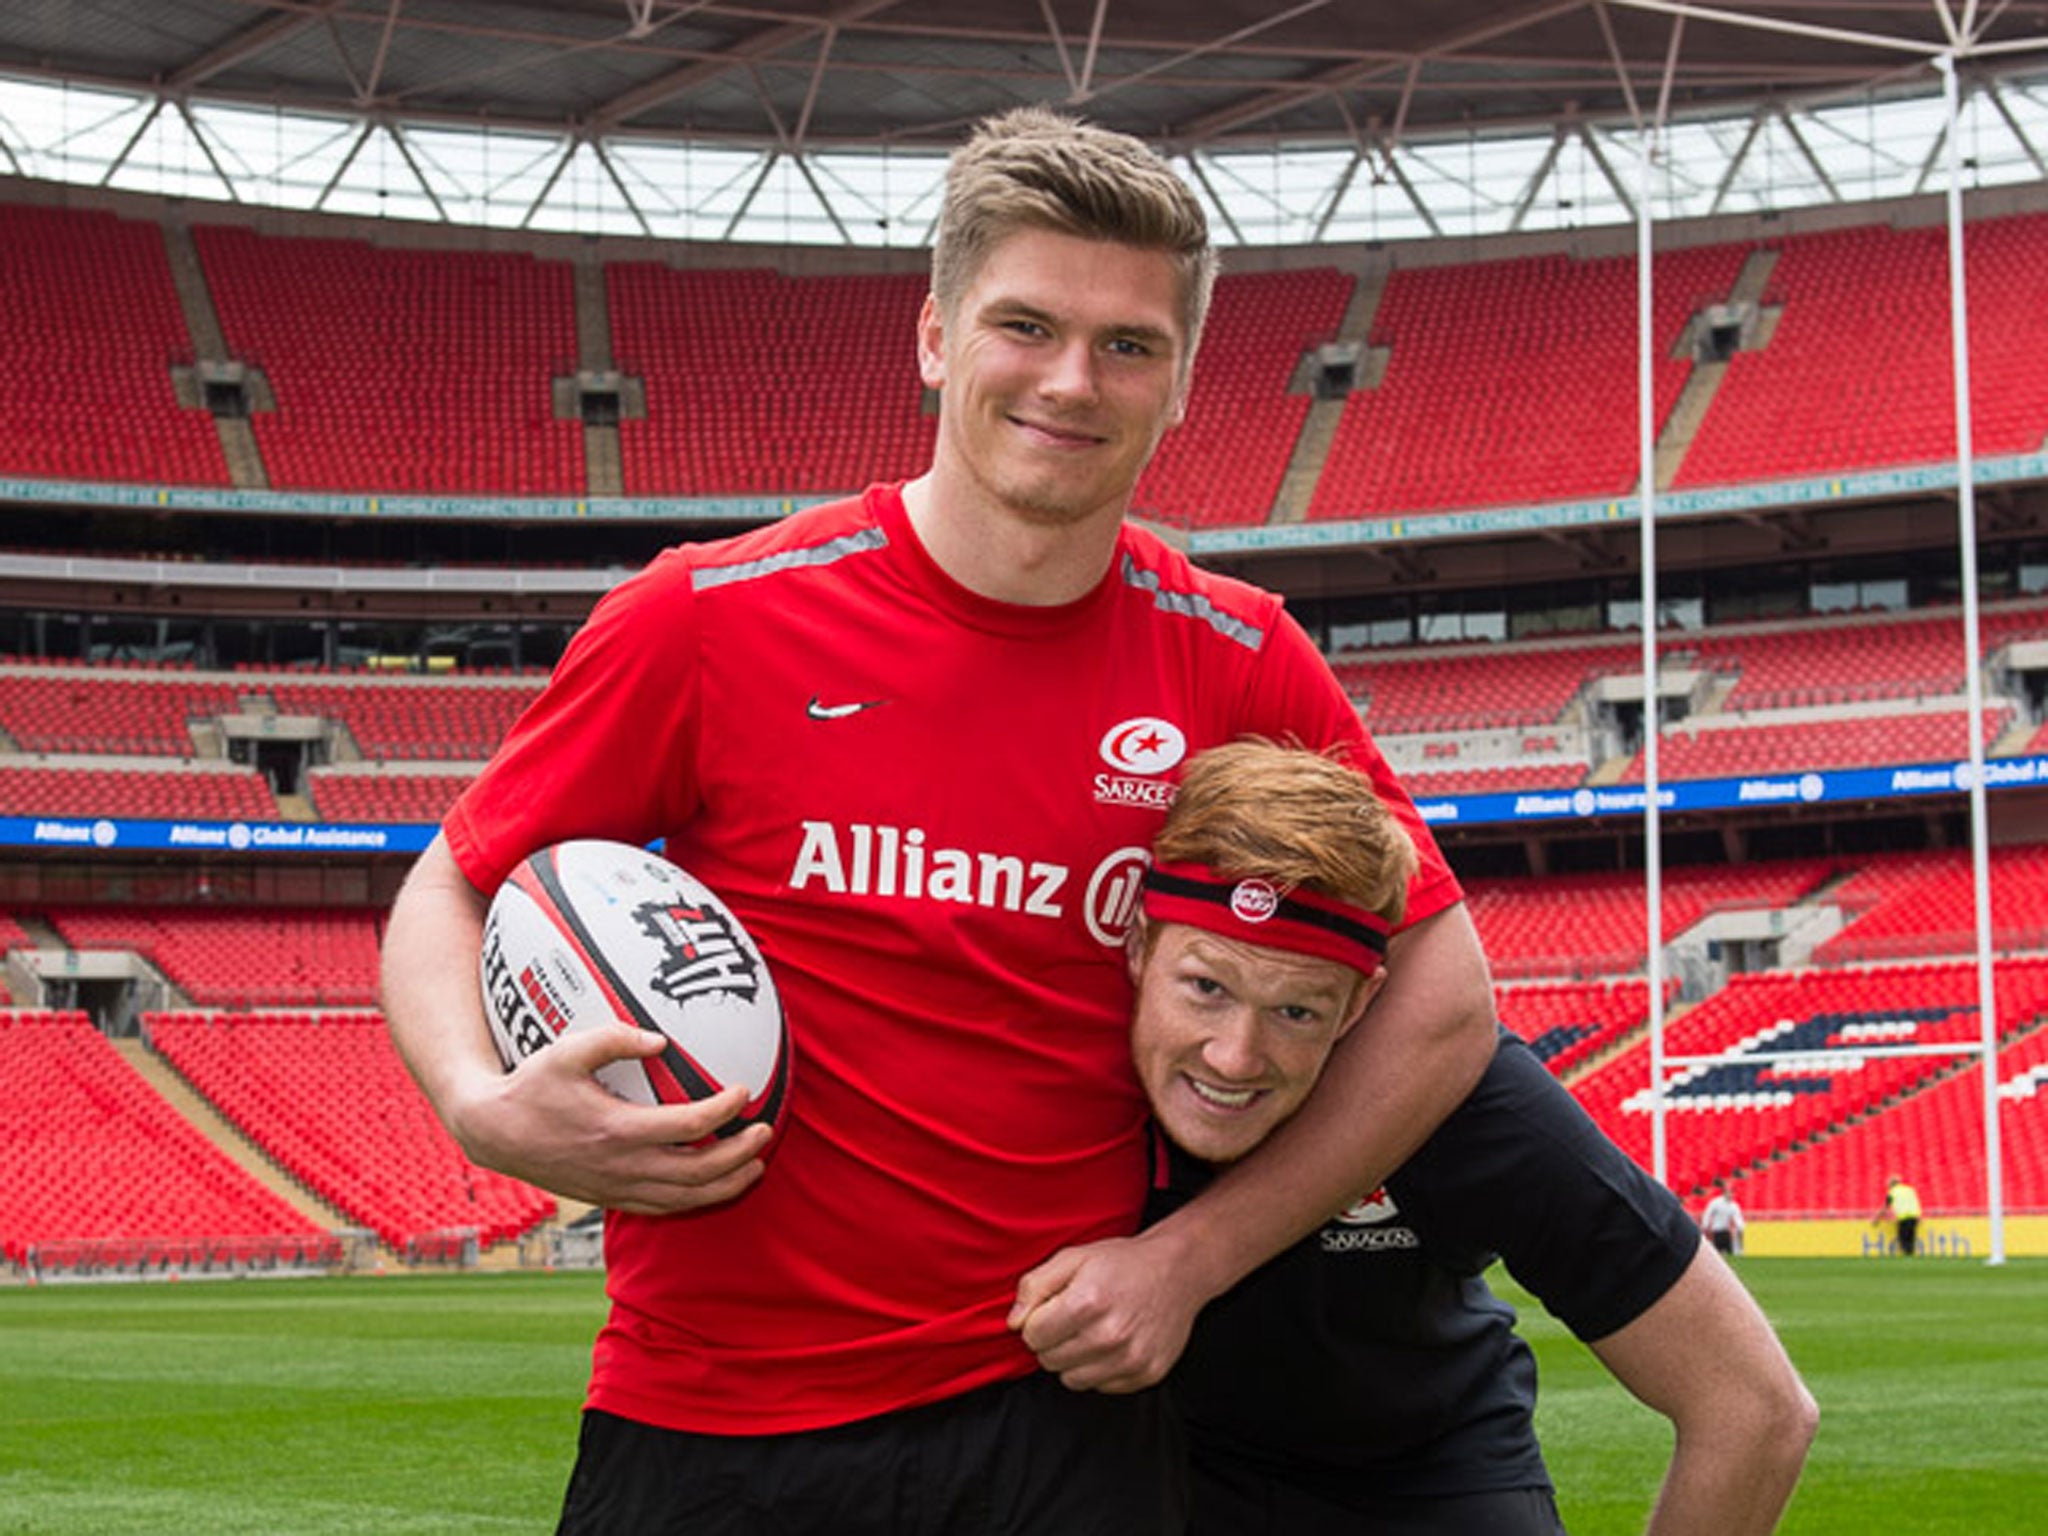 Greg Rutherford (right) poses with Owen Farrell (left). Rutherford takes on the Catch-a-Million challenge for Sport Relief at half time during Saracens v Harlequins at Wembley on March 22nd. The match kicks off at 3pm and is exclusively live on BT Sport